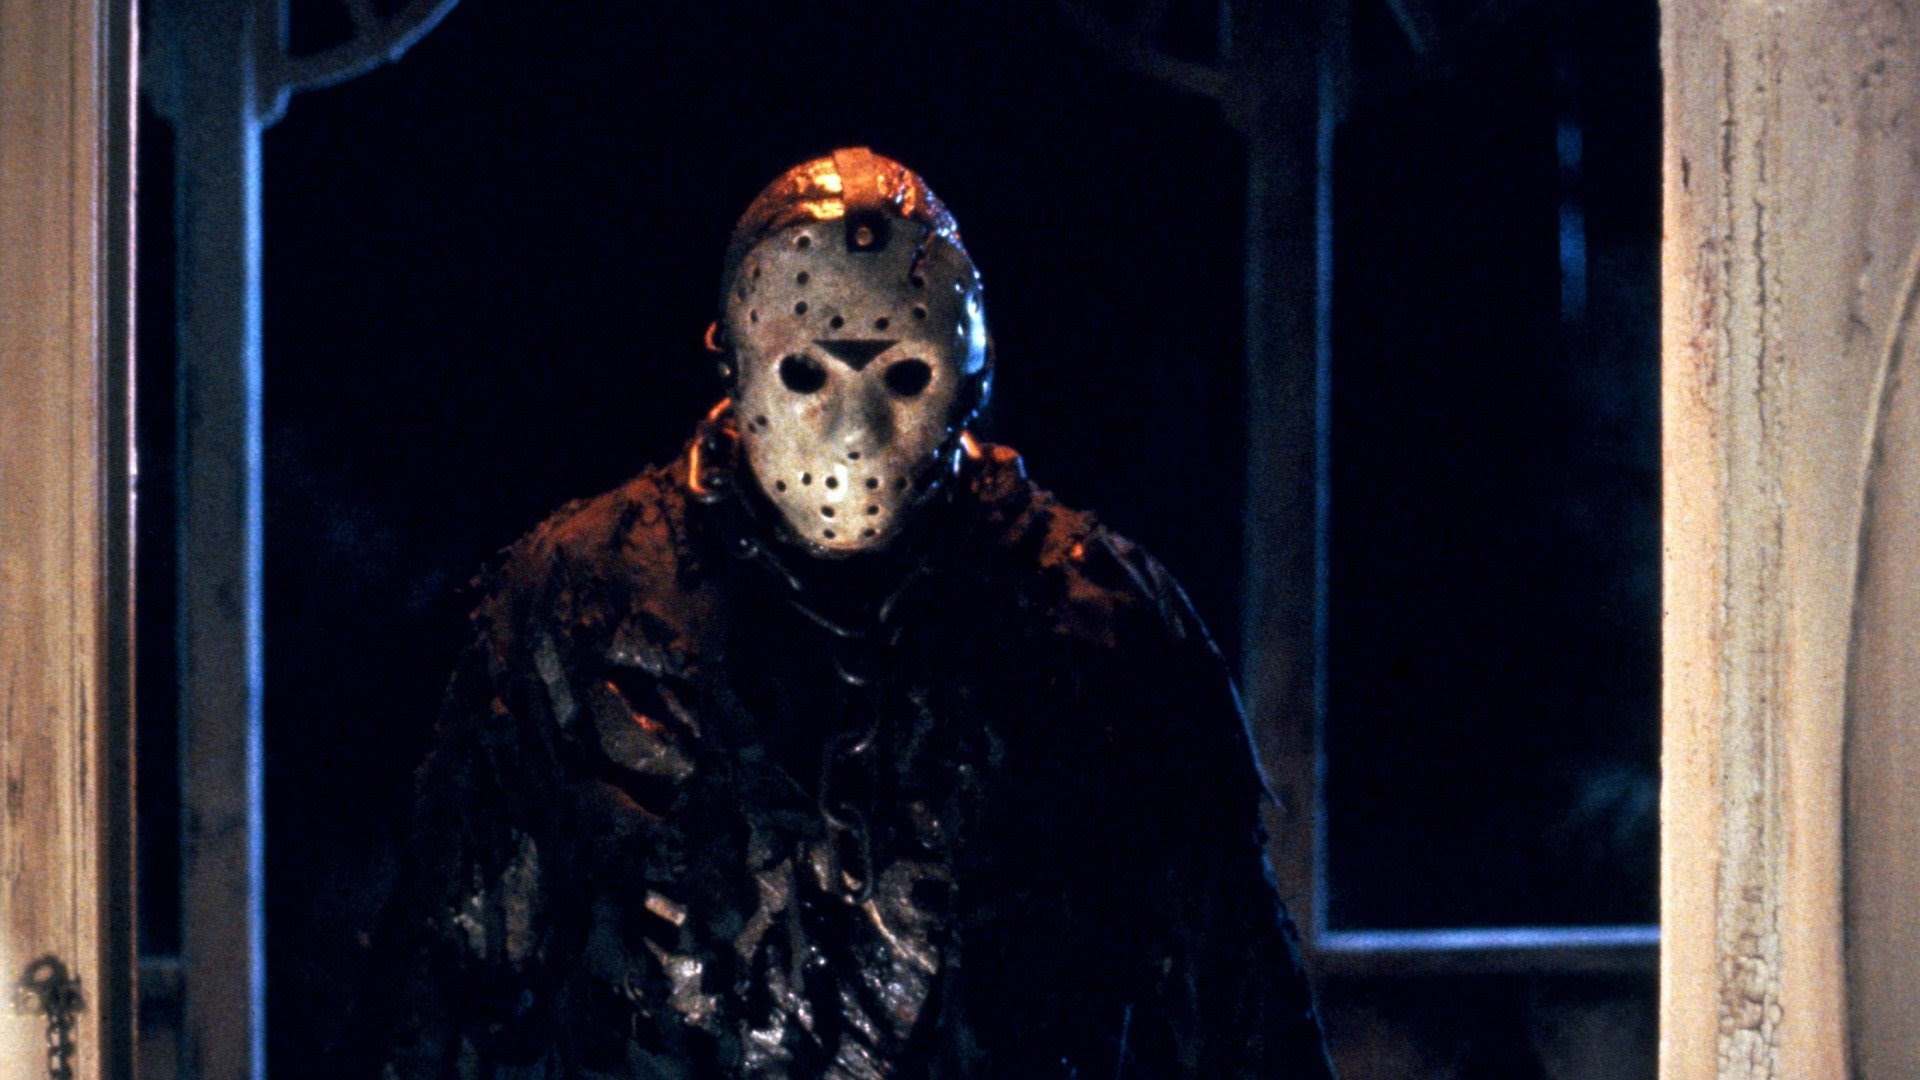 Comprar Friday the 13th Part VII: The New Blood - Microsoft Store pt-BR